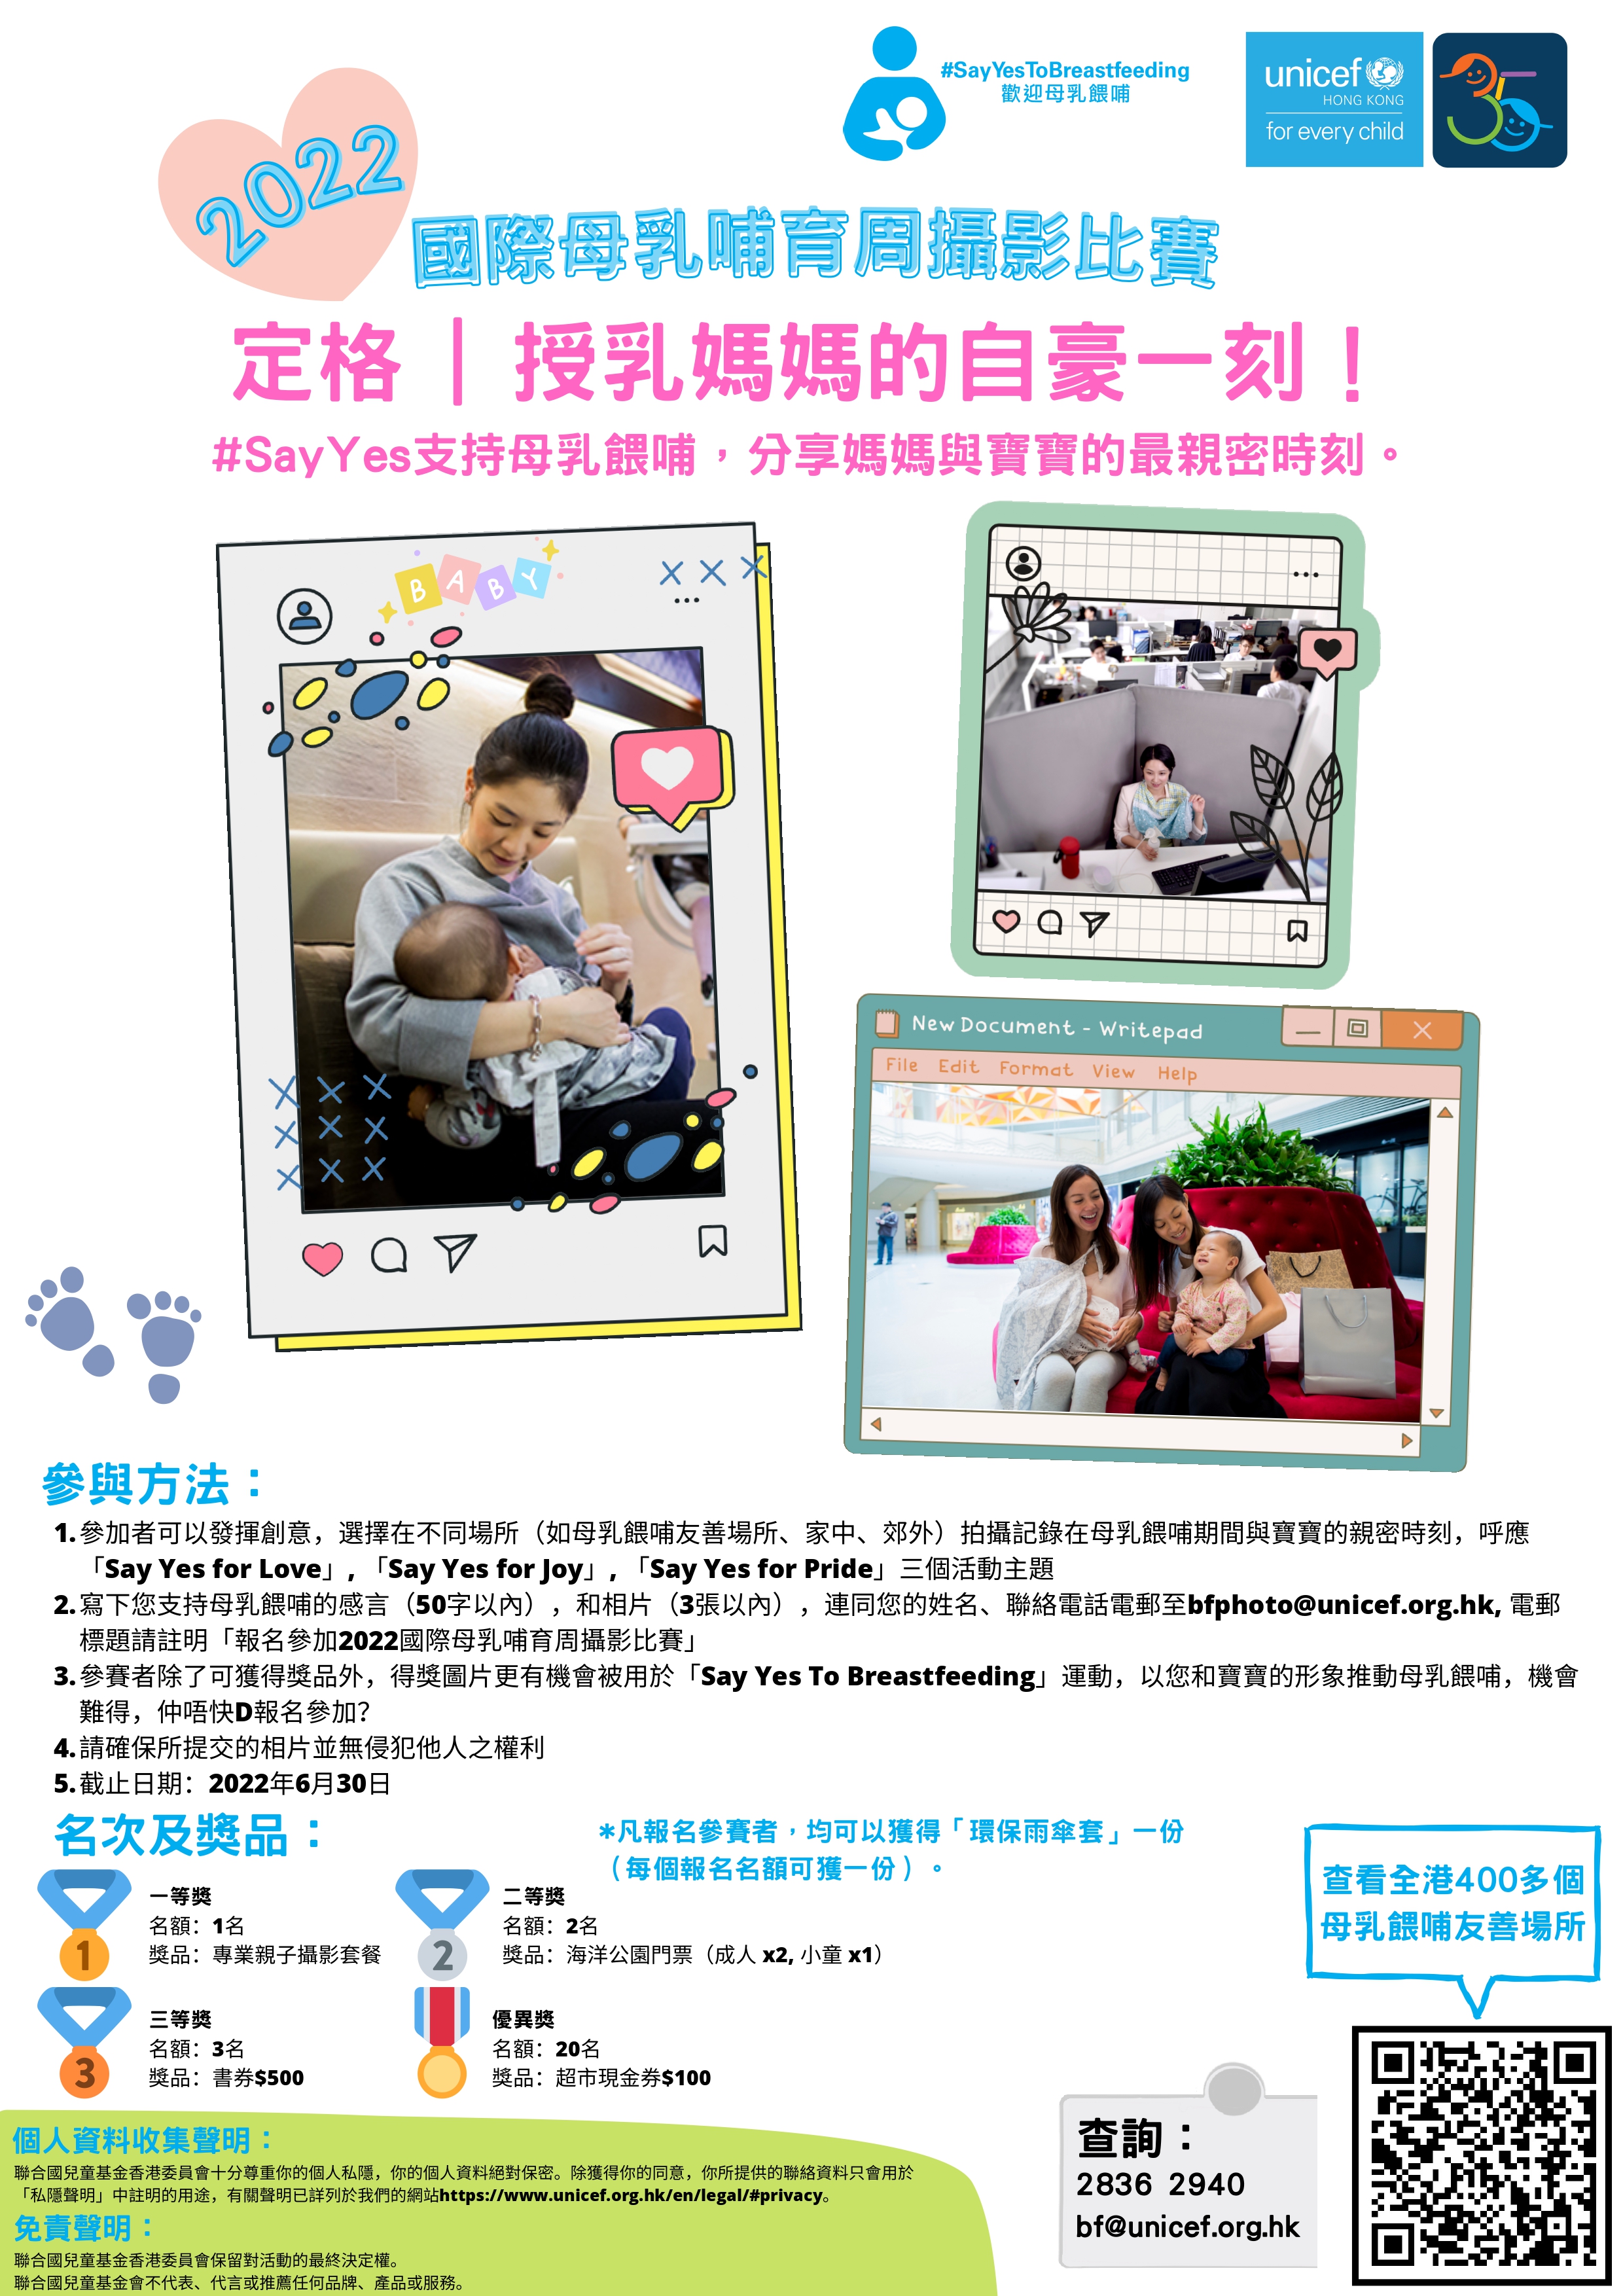 UNICEF HK Say Yes To Breastfeeding' Photo Competition Poster .Content same as text on this webpage.